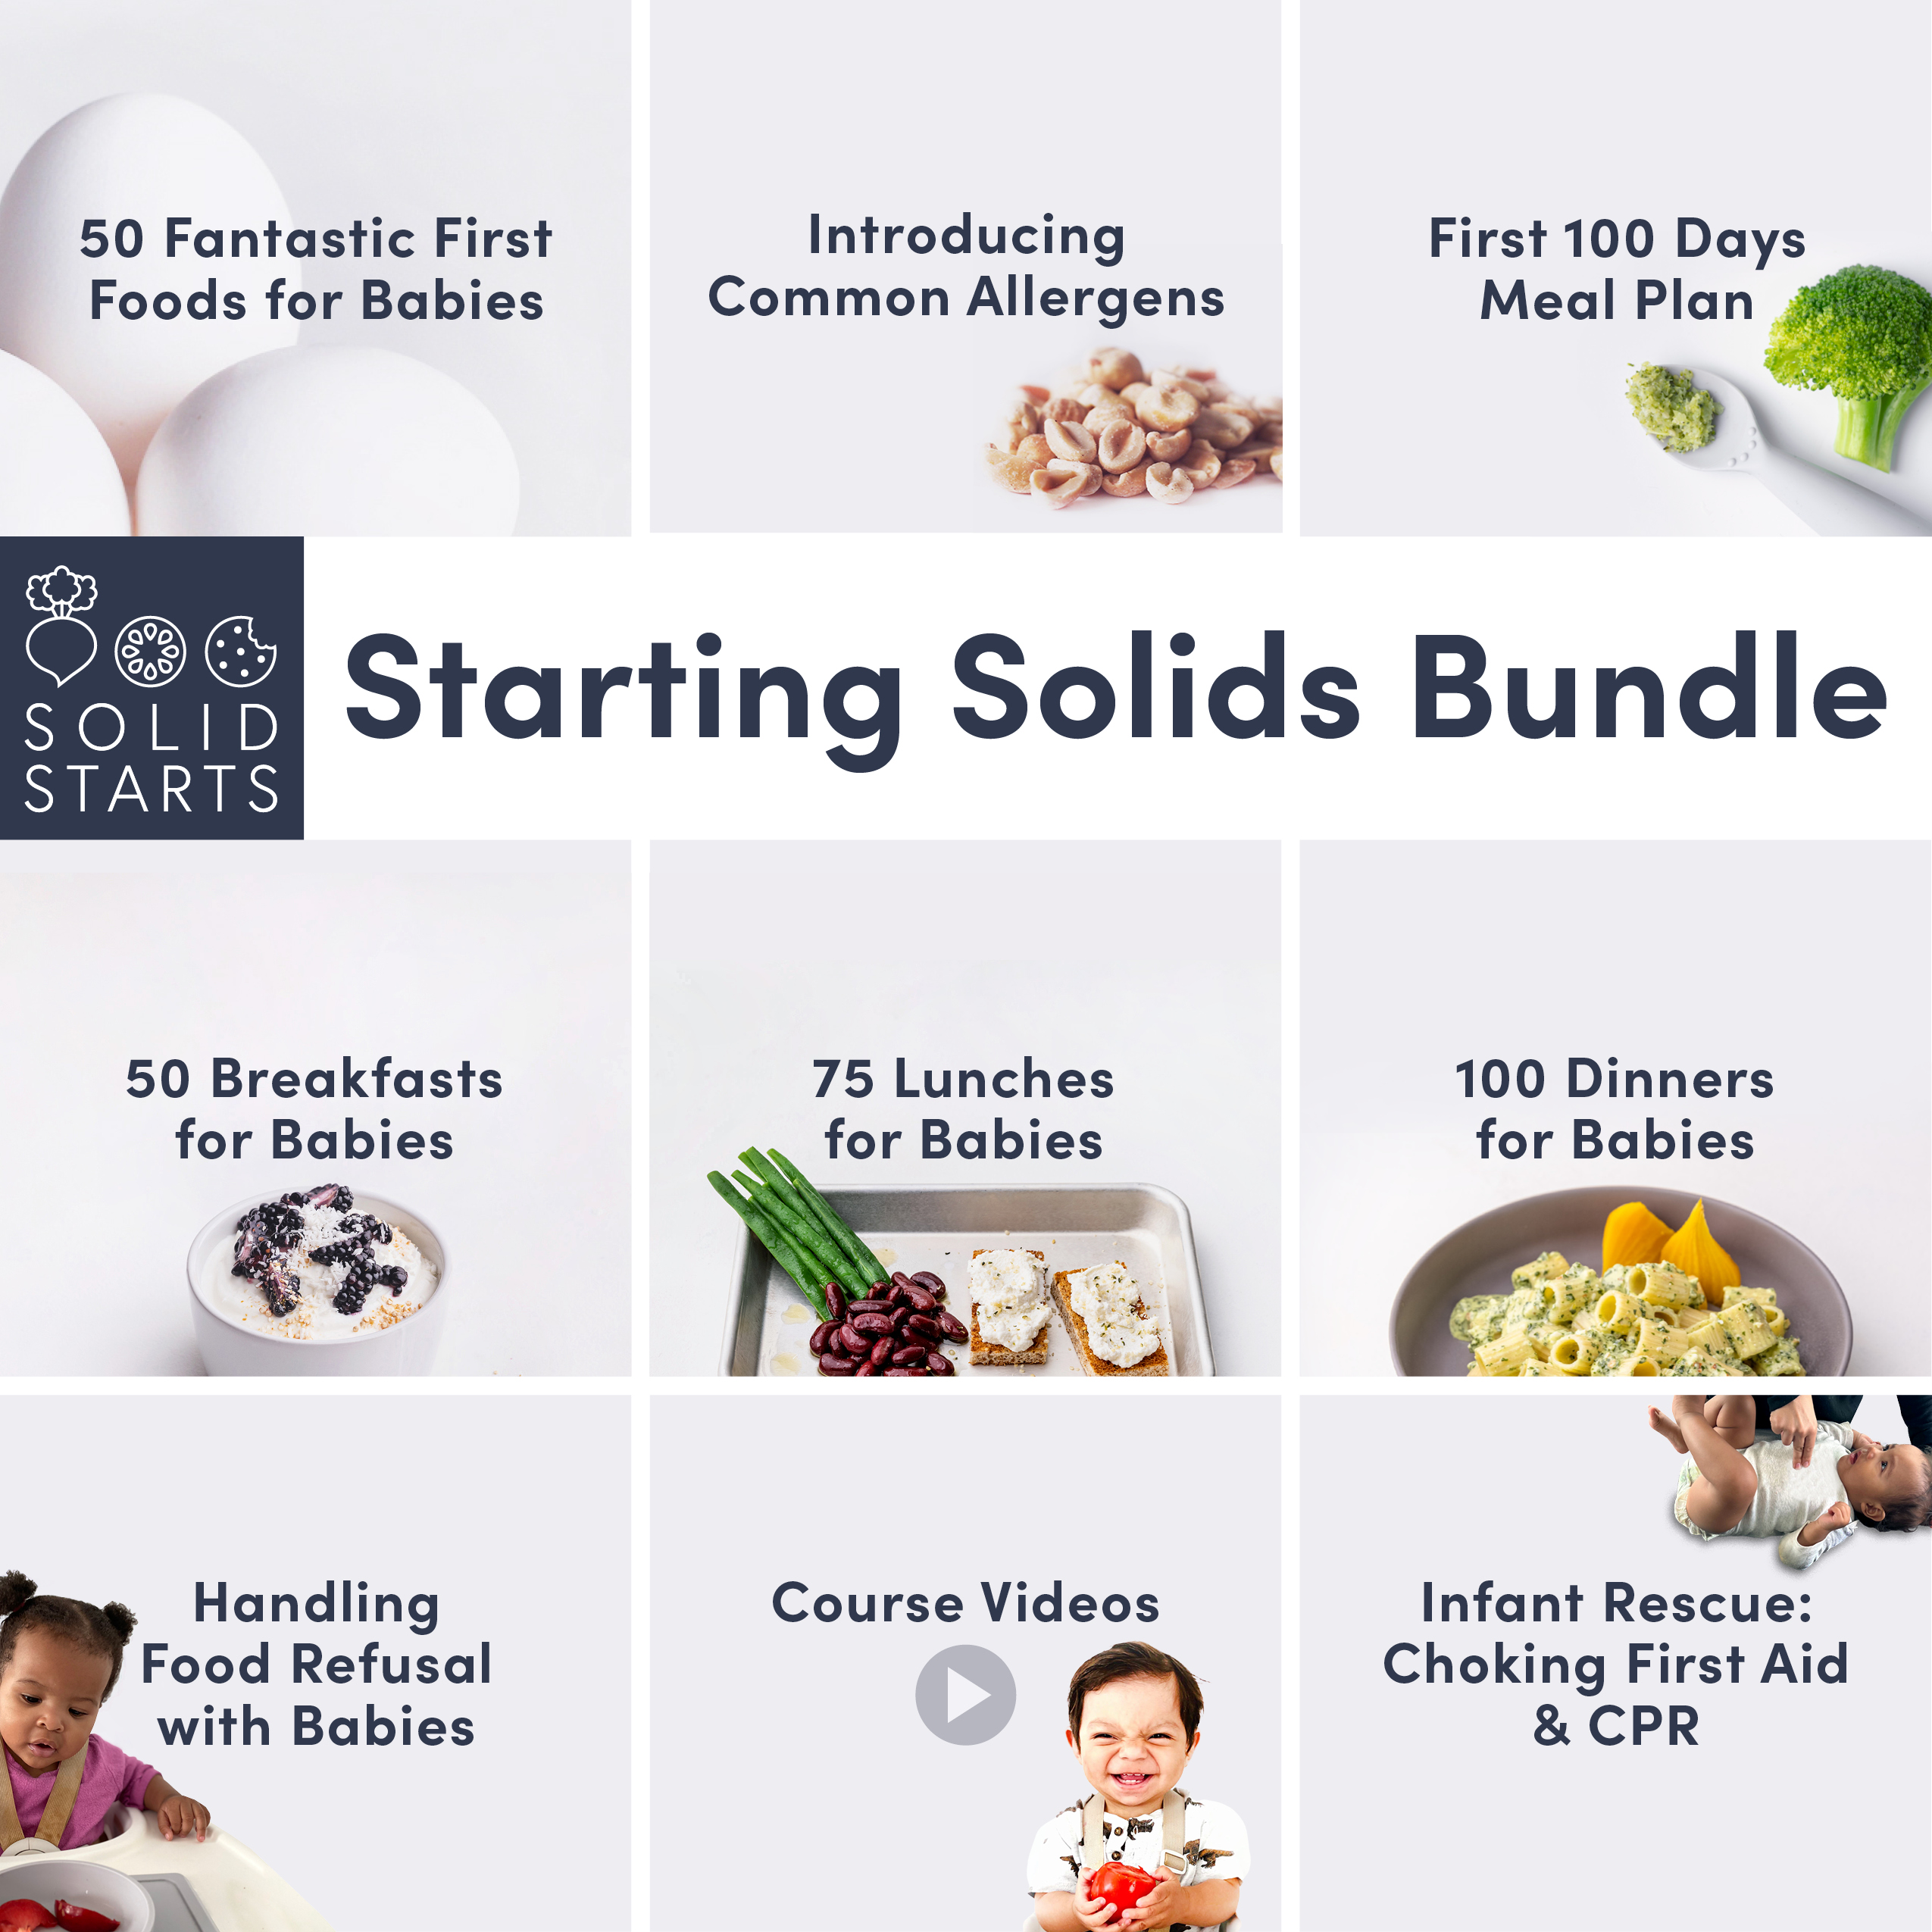 Gagging vs. Choking When Baby Starts Solids - Solid Starts